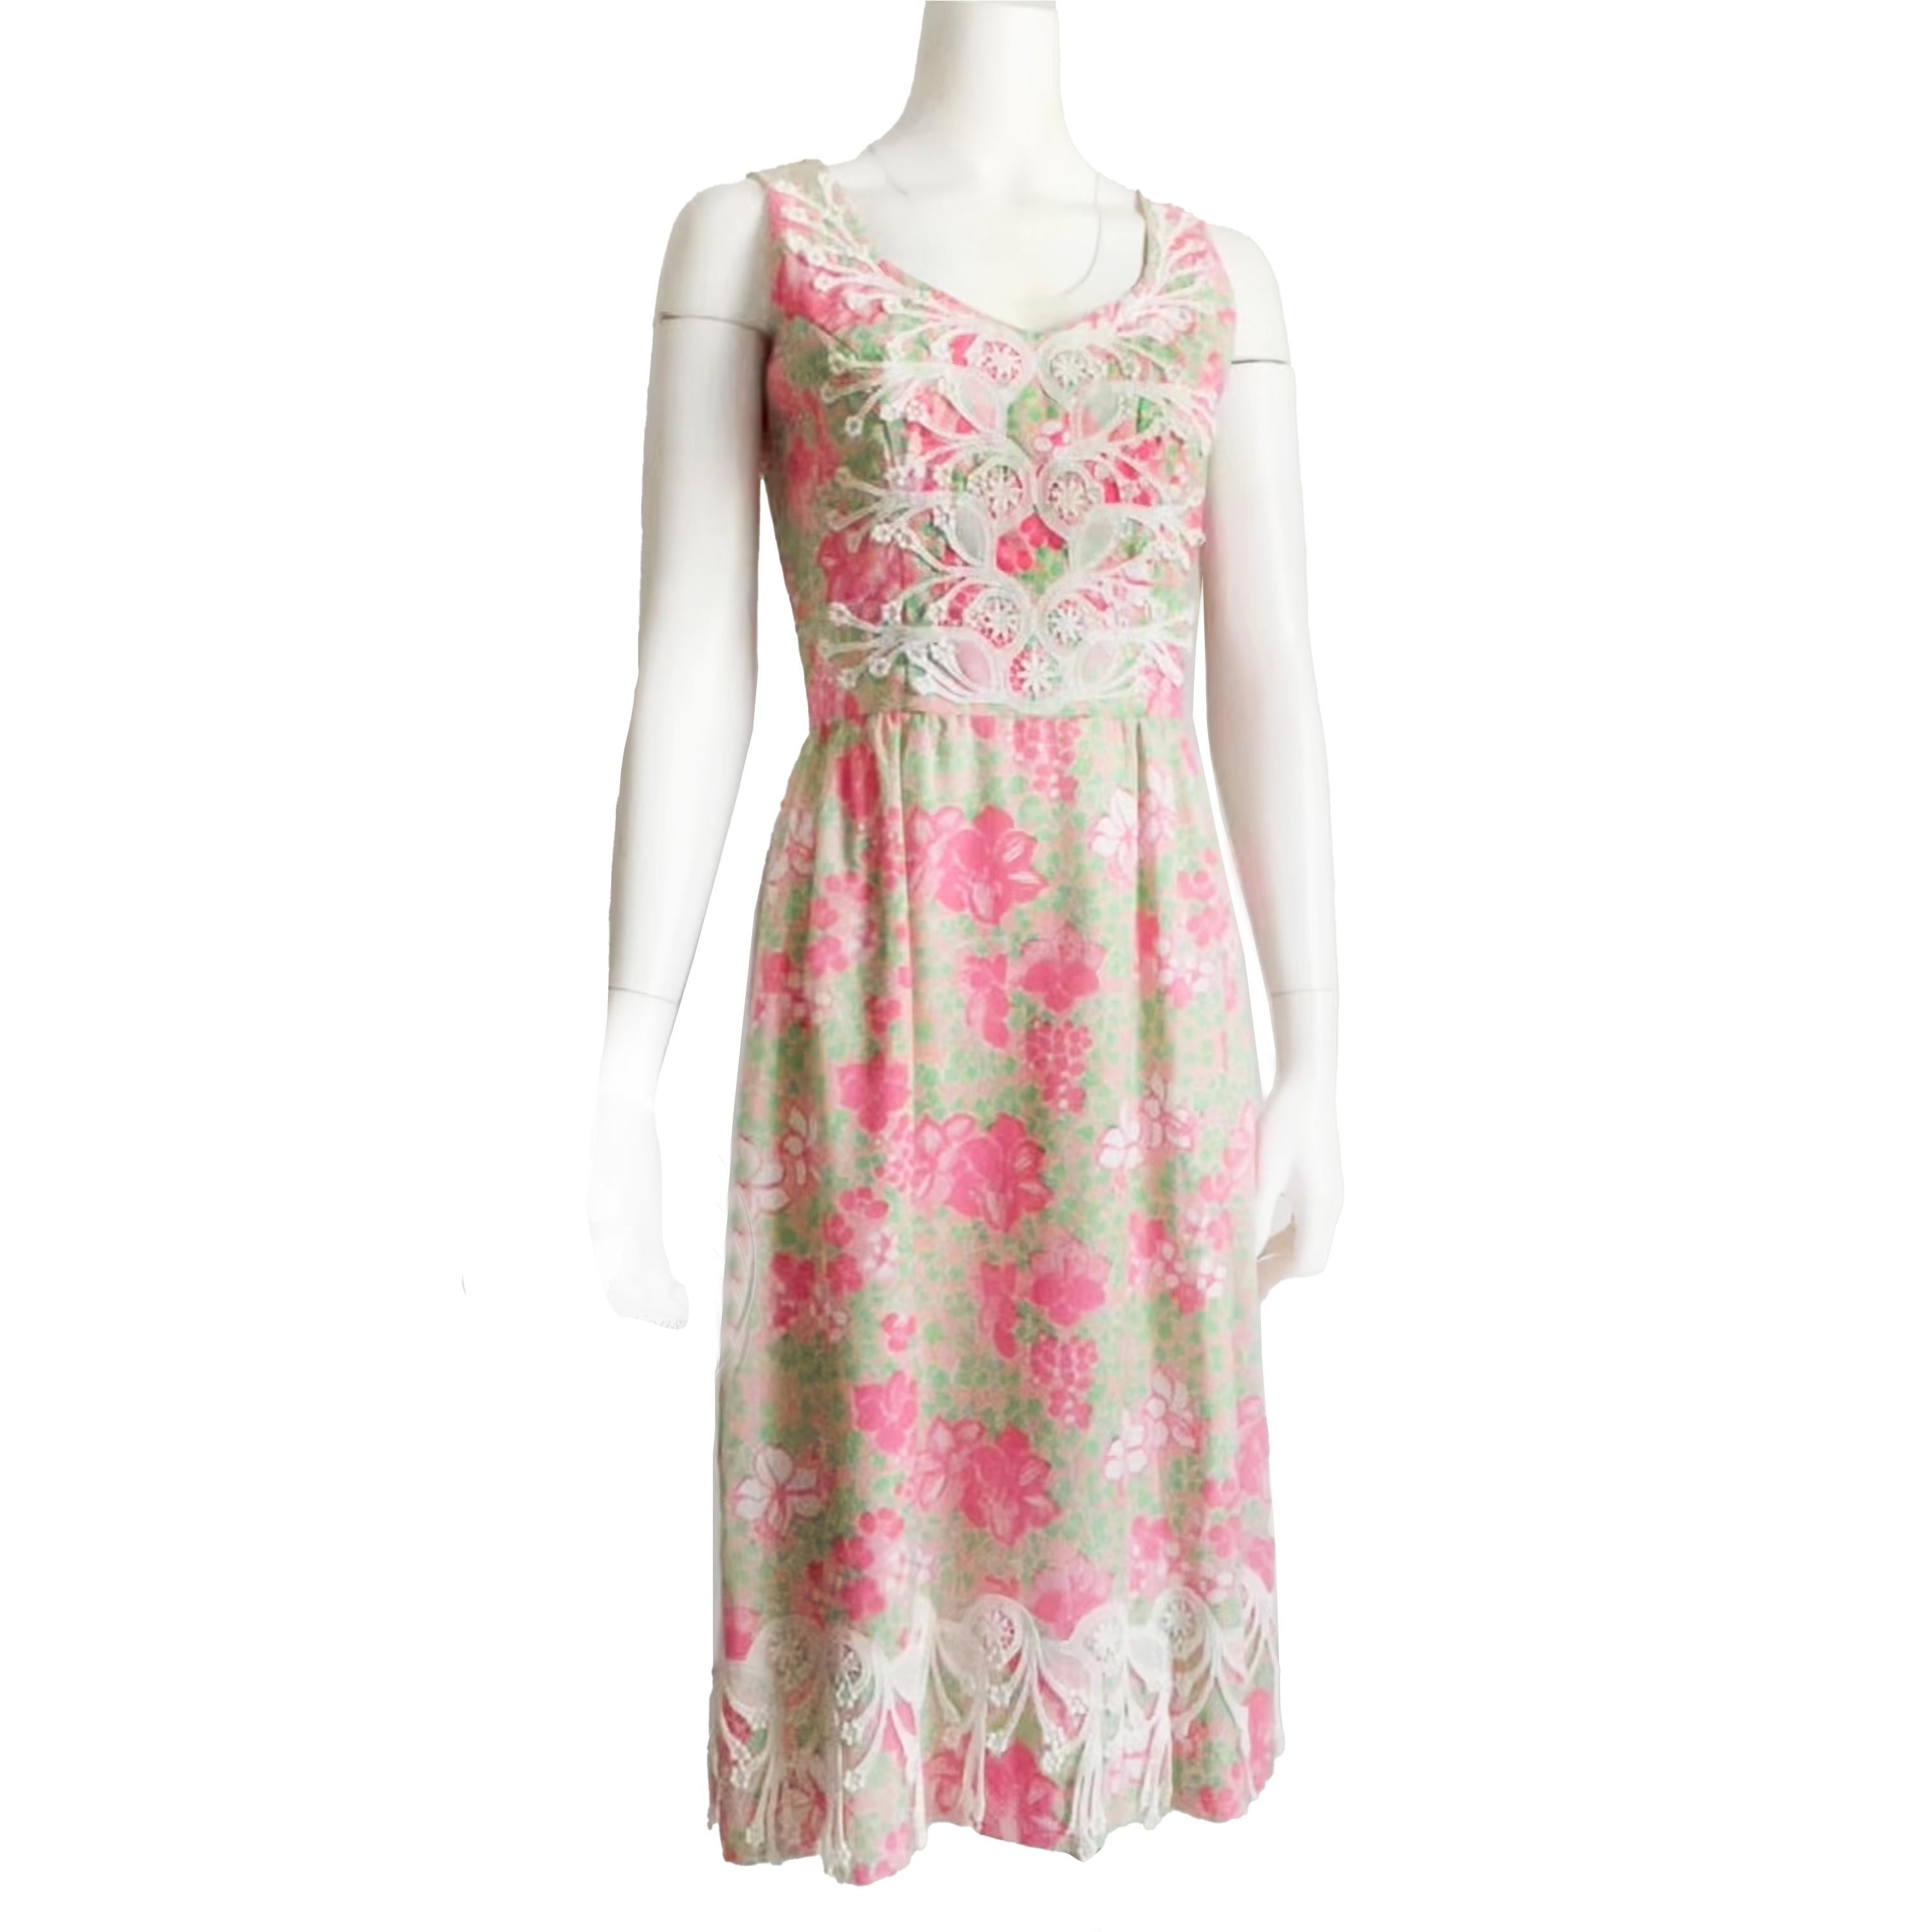 Authentic, preowned, vintage Original Lilly Pulitzer 'The Lilly' Dress with Lace, circa 1970s. Made from a gorgeous pink, green and white floral print, it has white lace at the bodice and trimming the skirt bottom hem! Fitted at the waist and flared